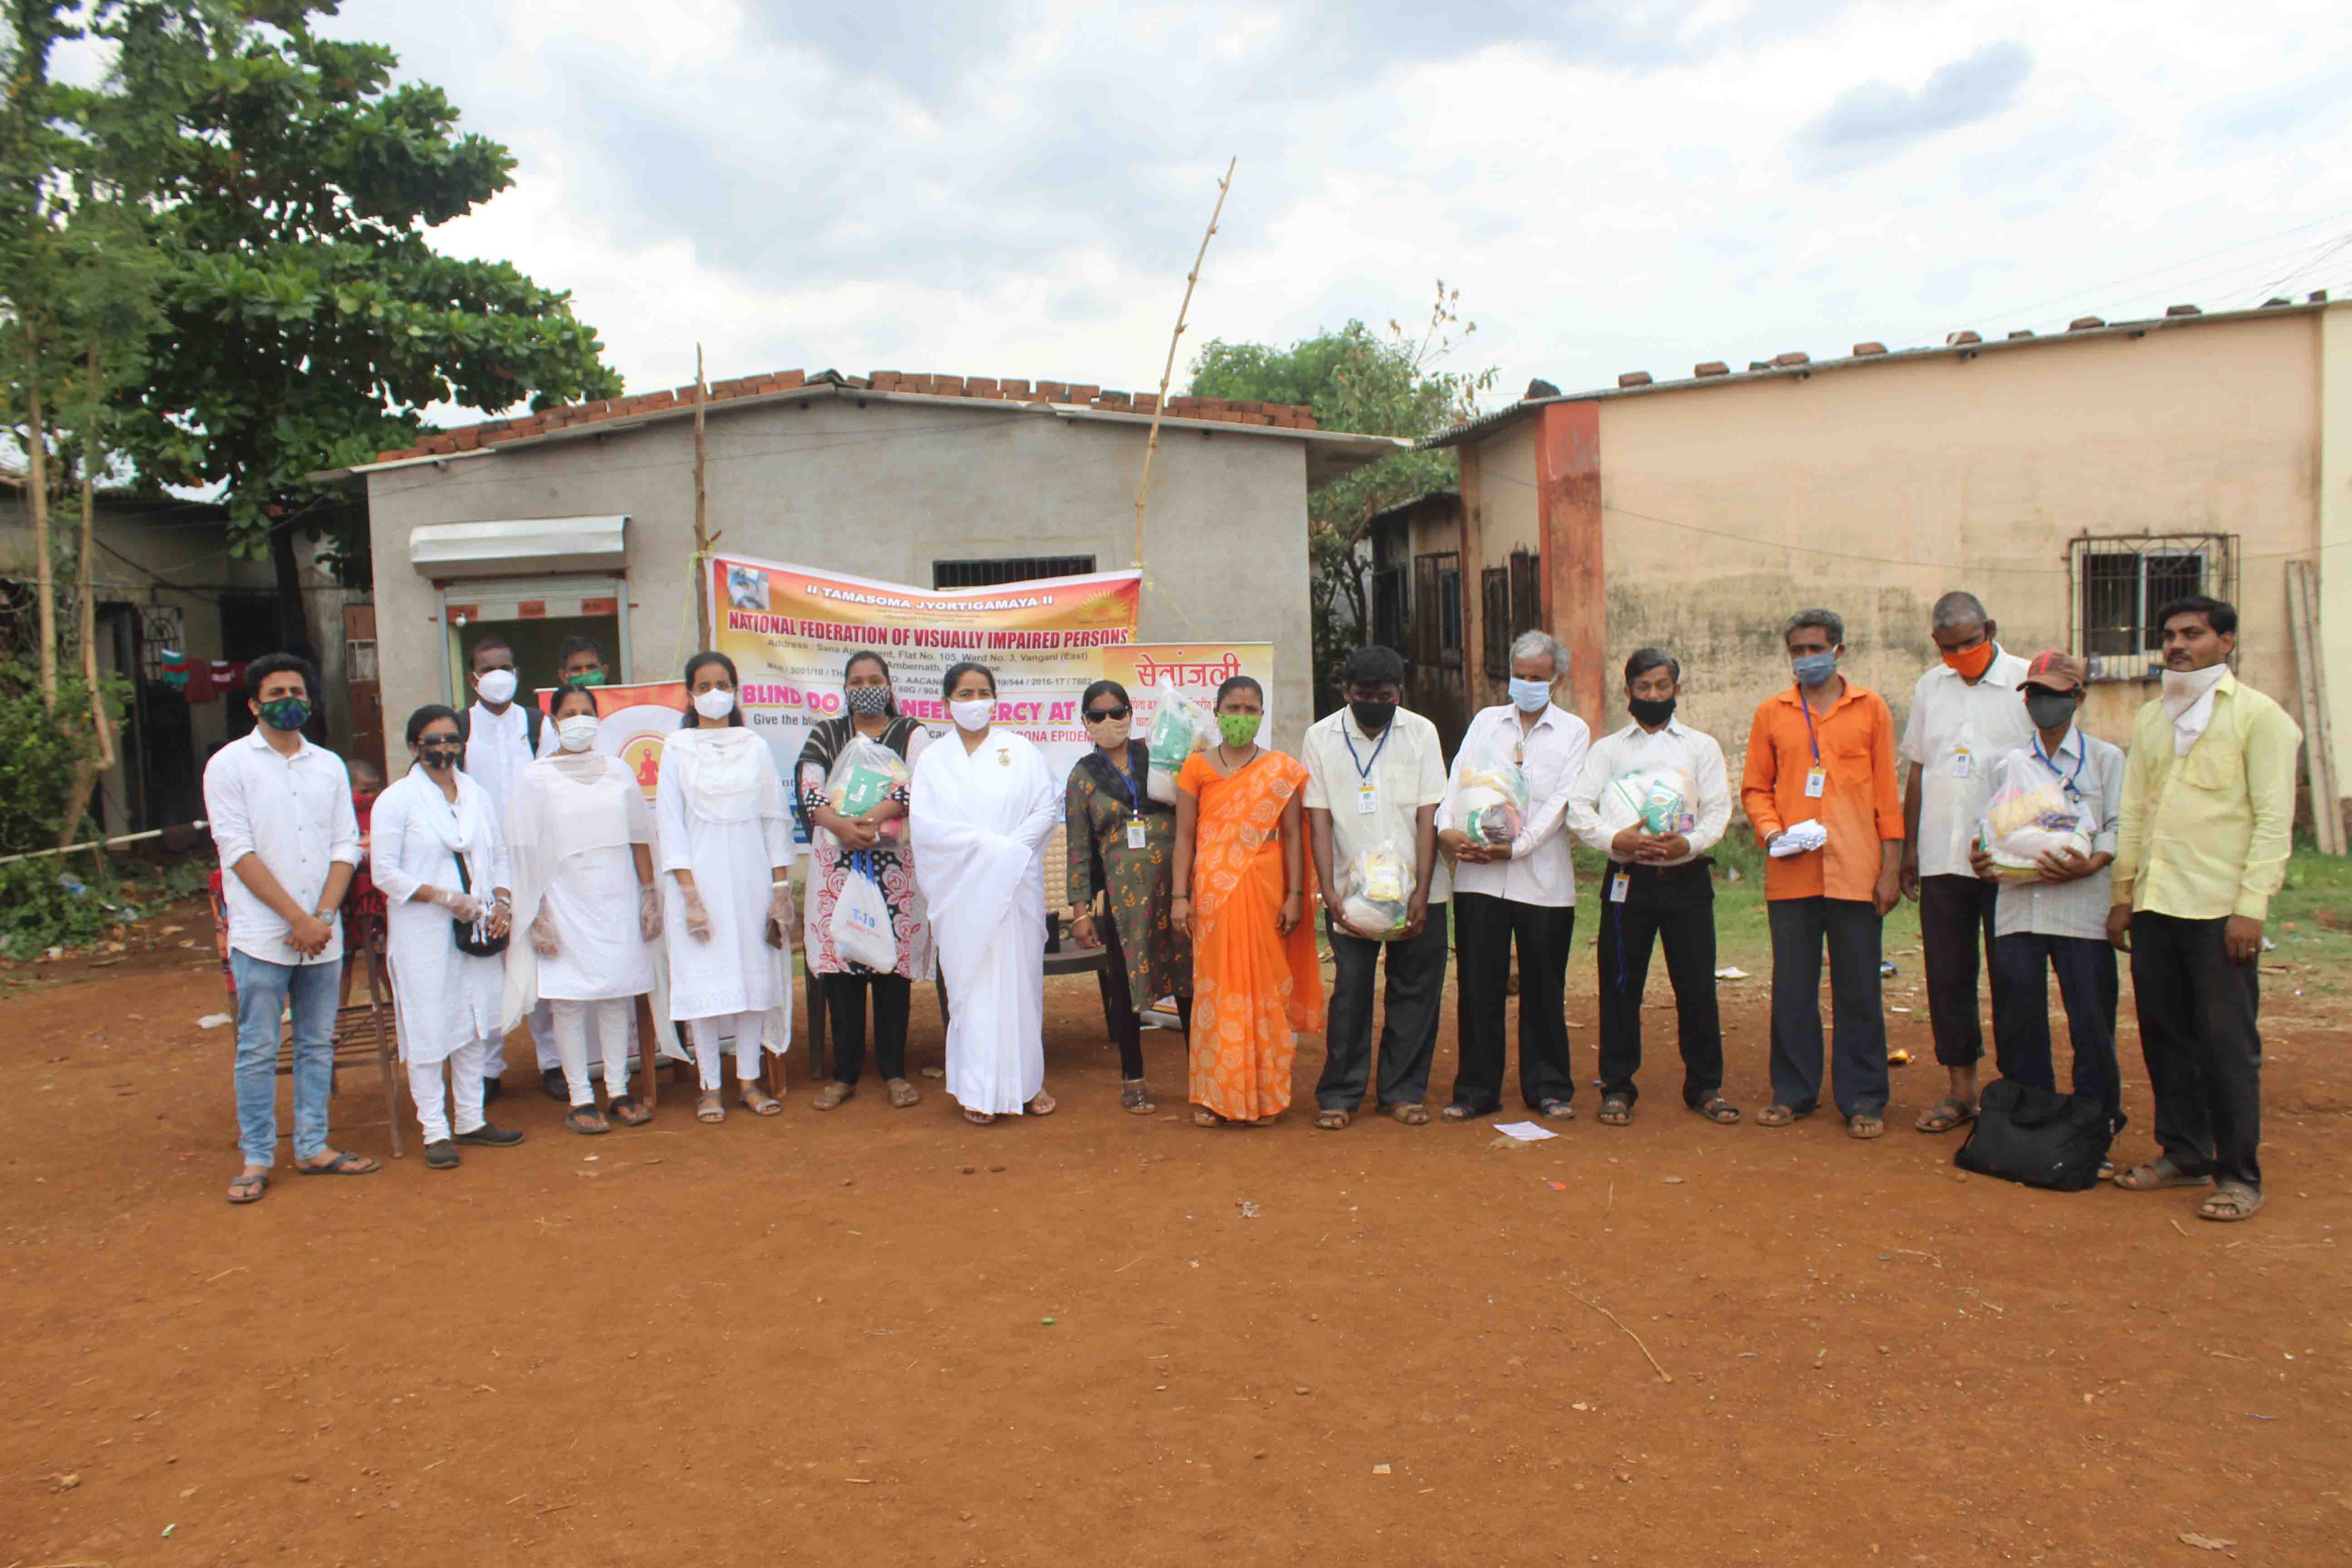 Brahmakumaris Delegation with Representatives of National Federation of Visually Impaired Persons.